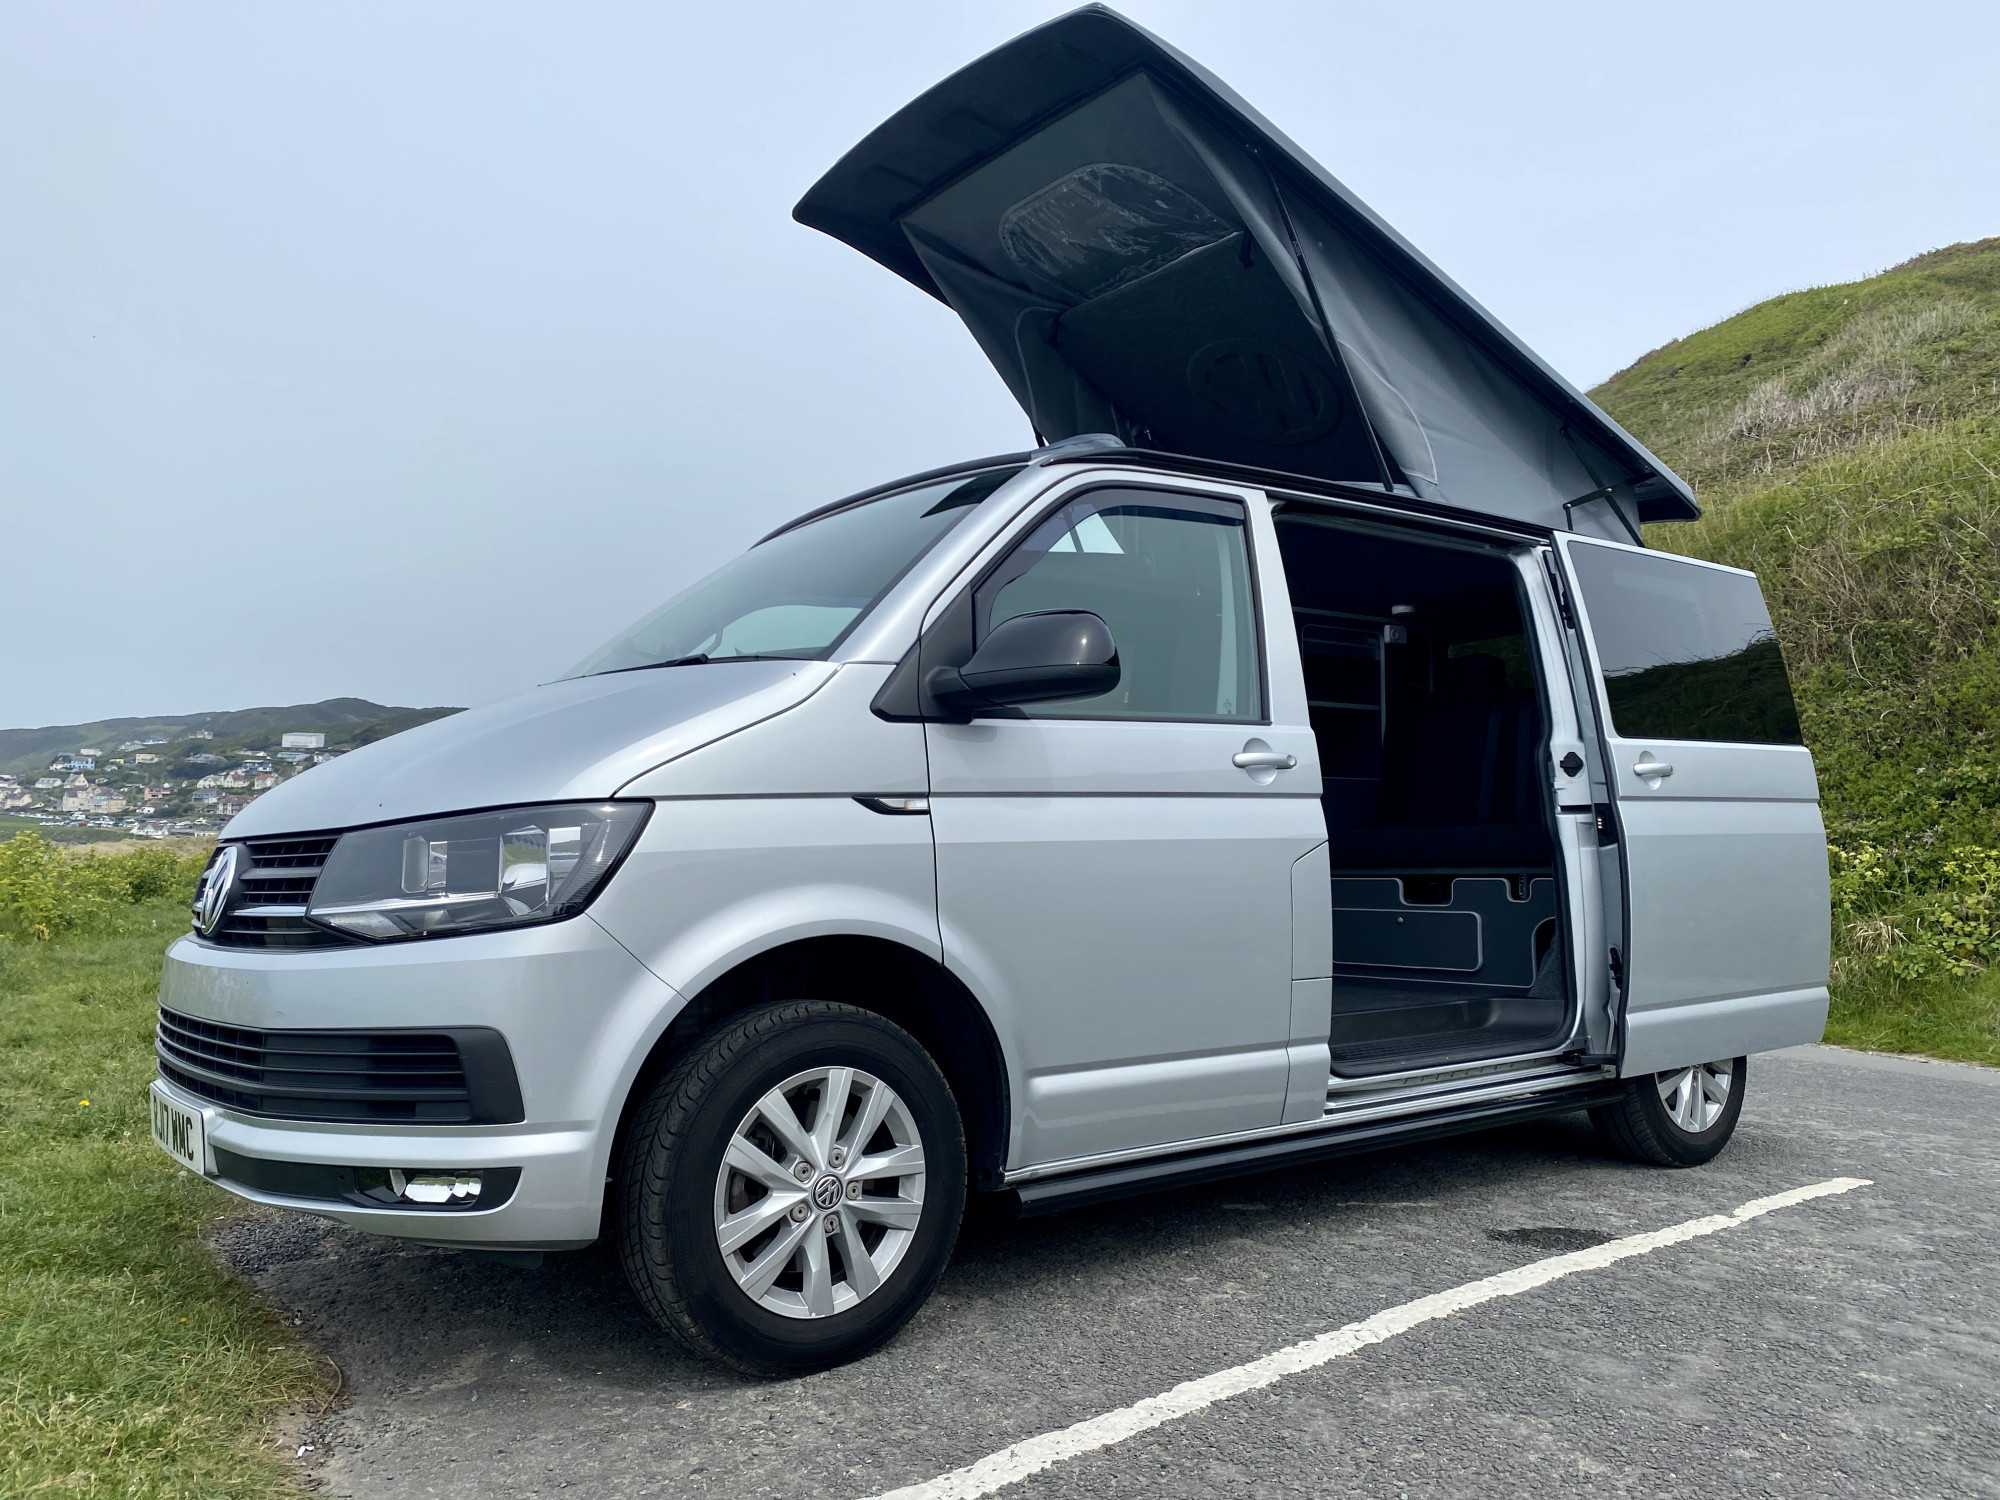 A VW T6 Campervan called Shona and for hire in Hinckley, England